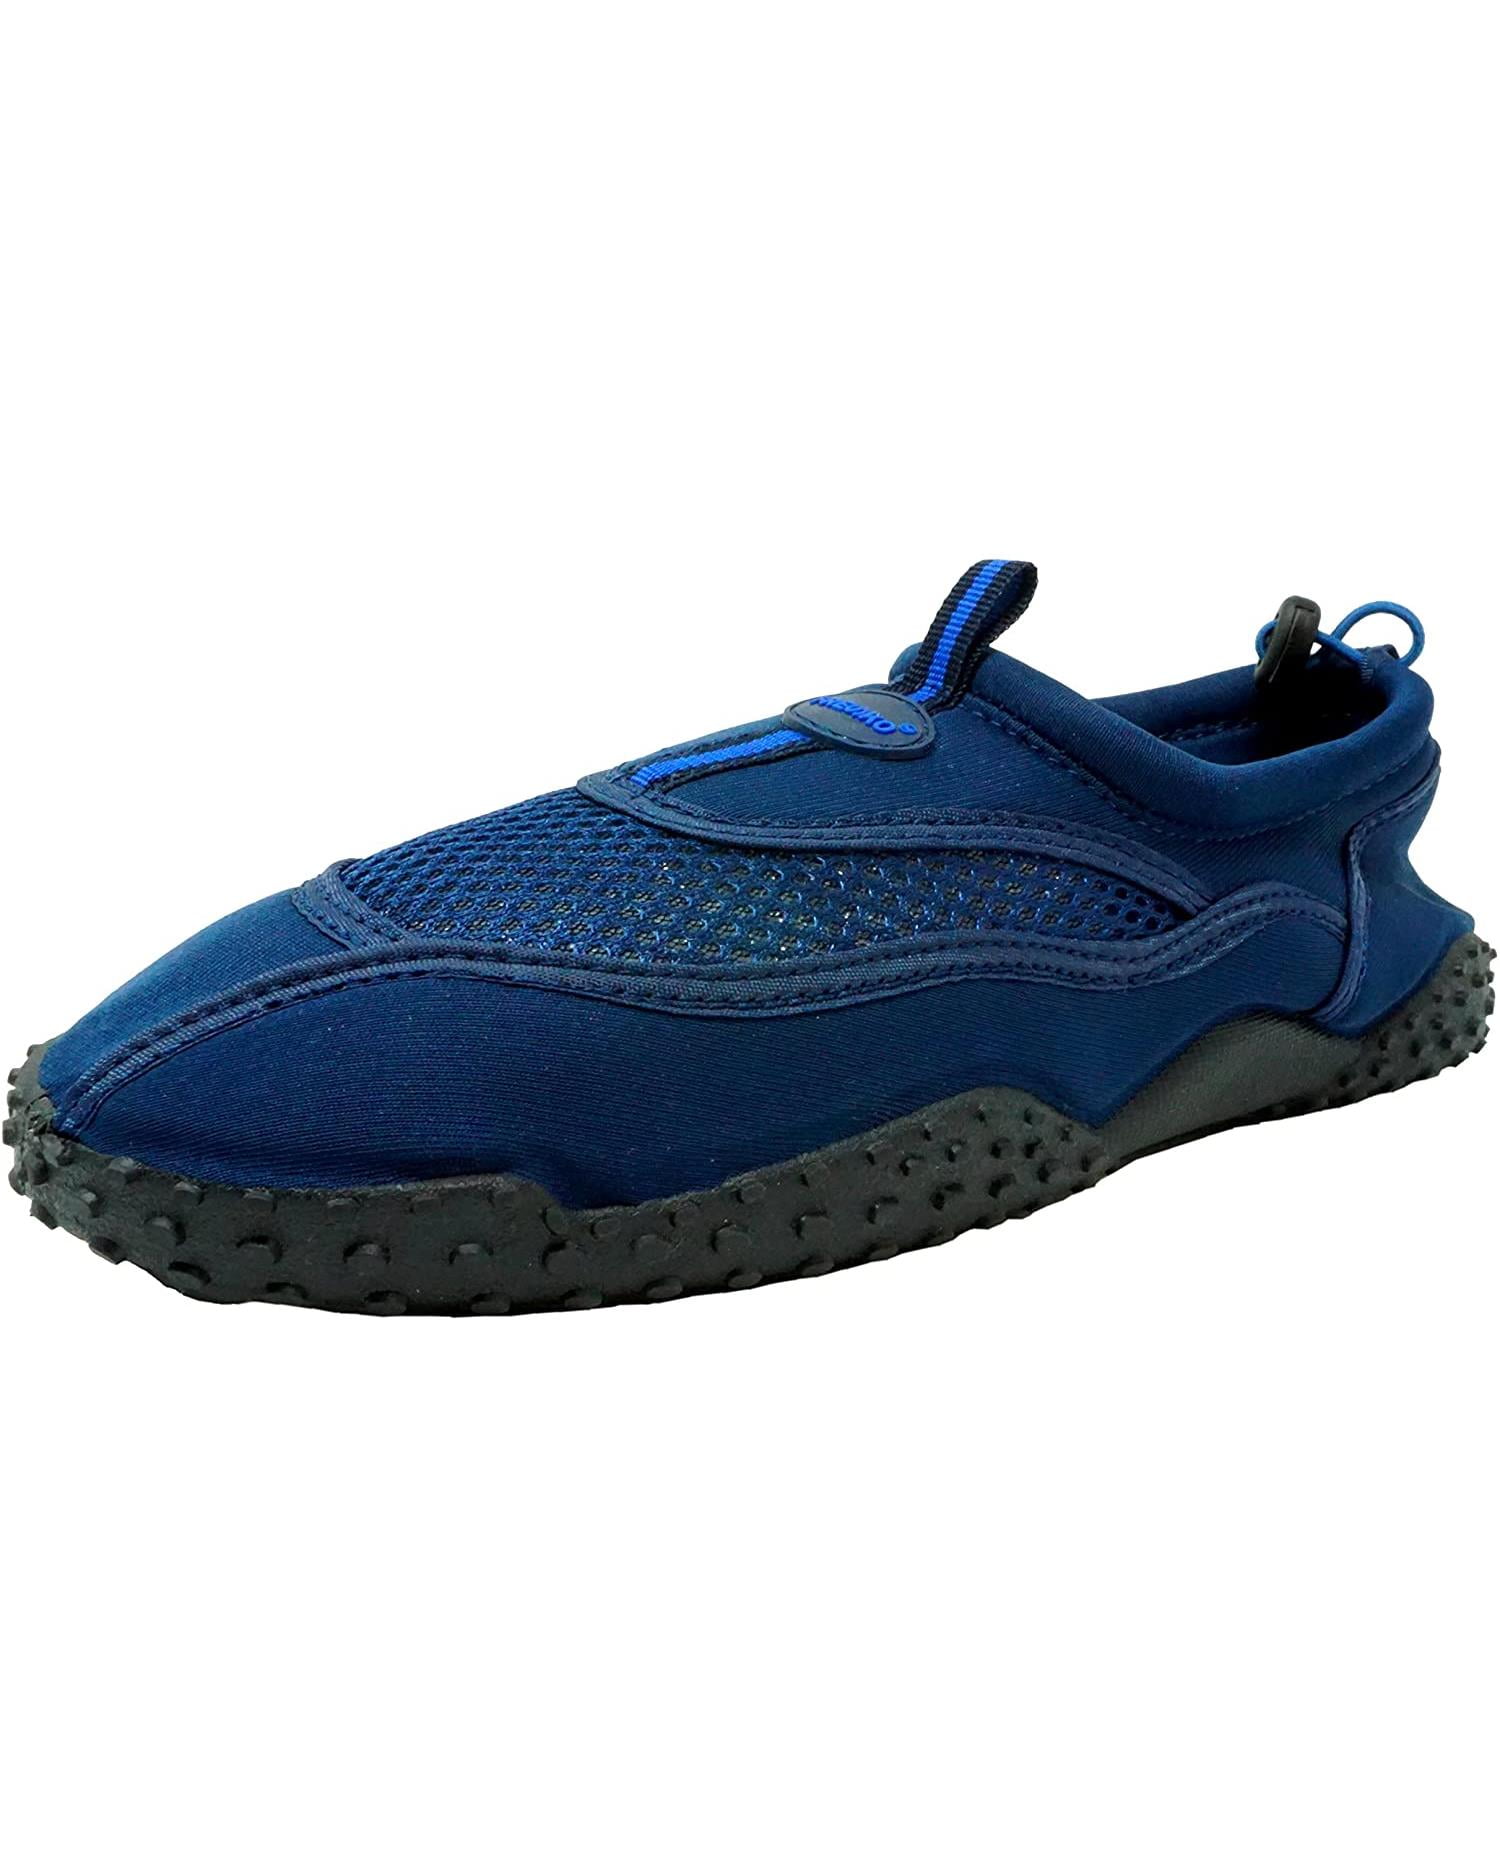 size 14 water shoes